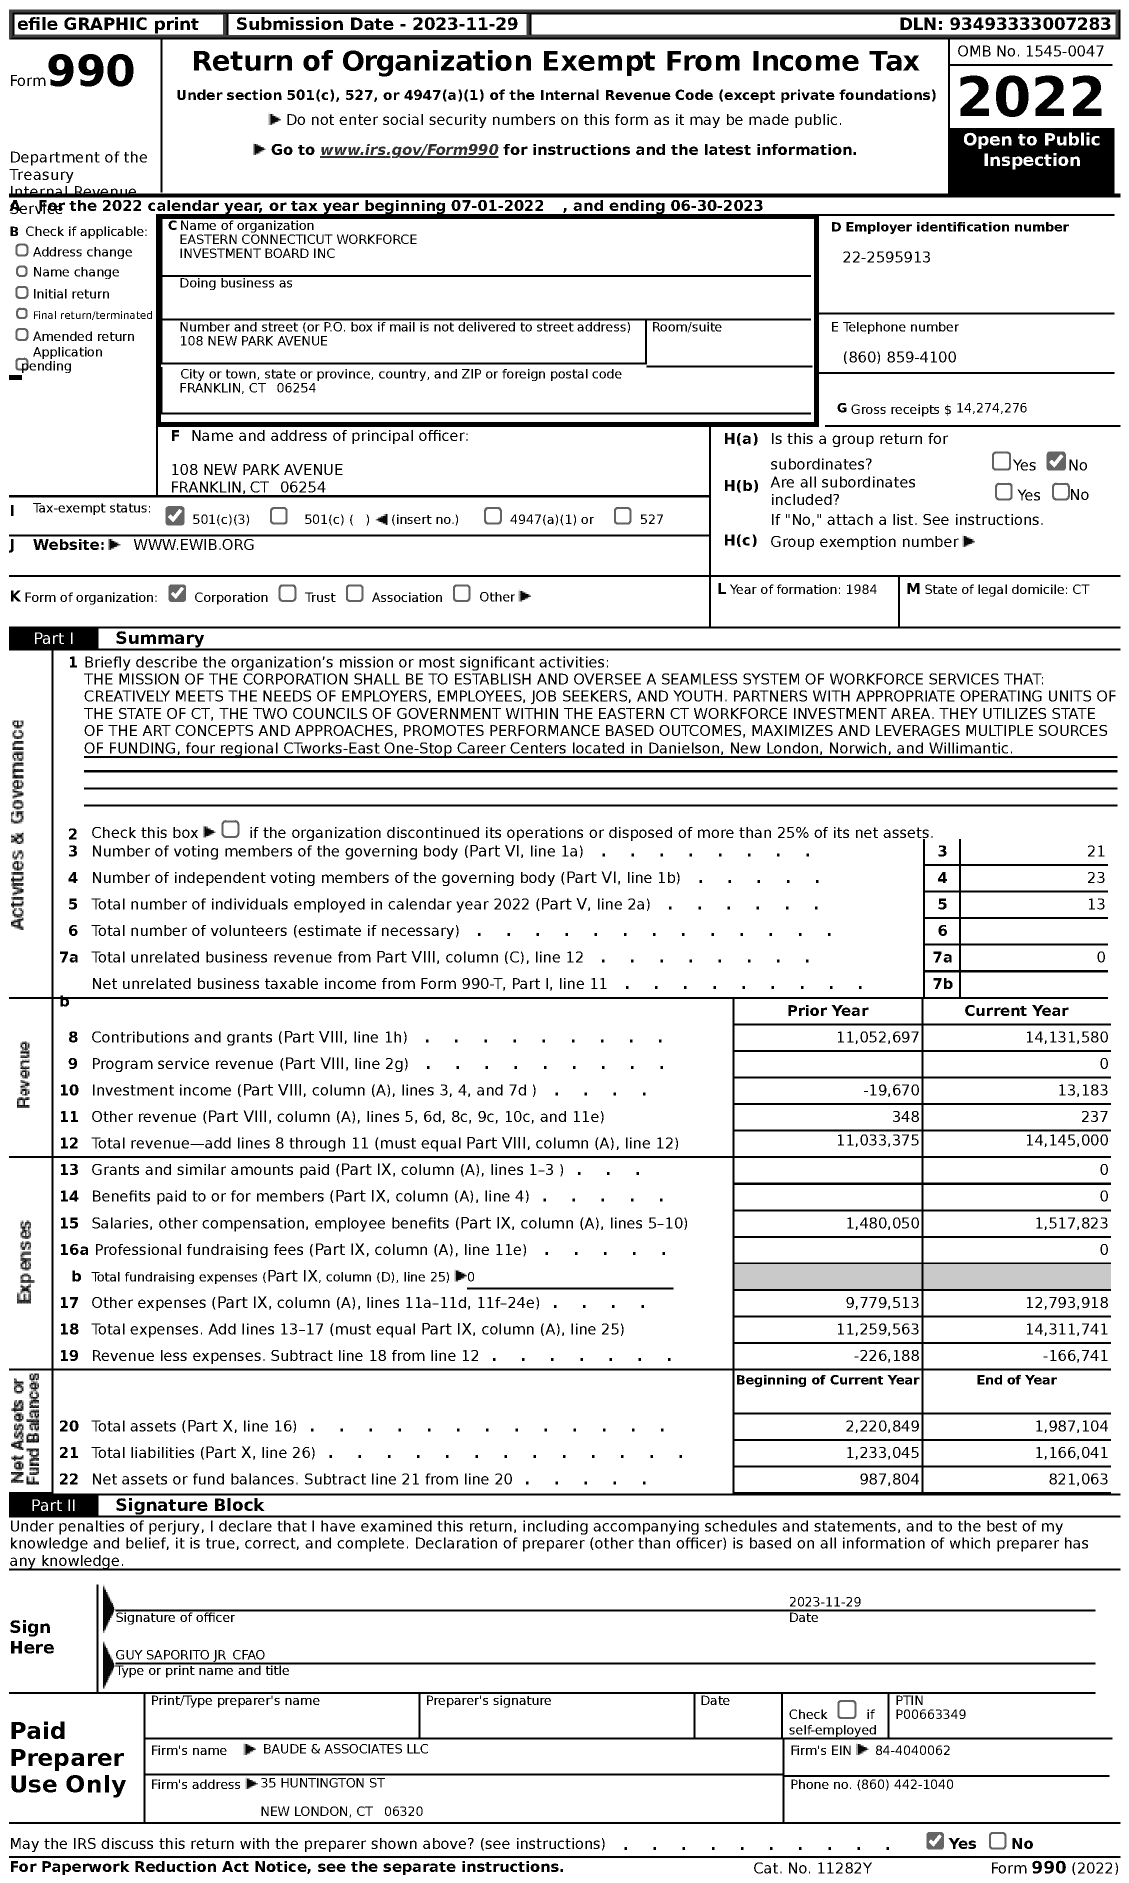 Image of first page of 2022 Form 990 for Eastern Connecticut Workforce Investment Board (EWIB)